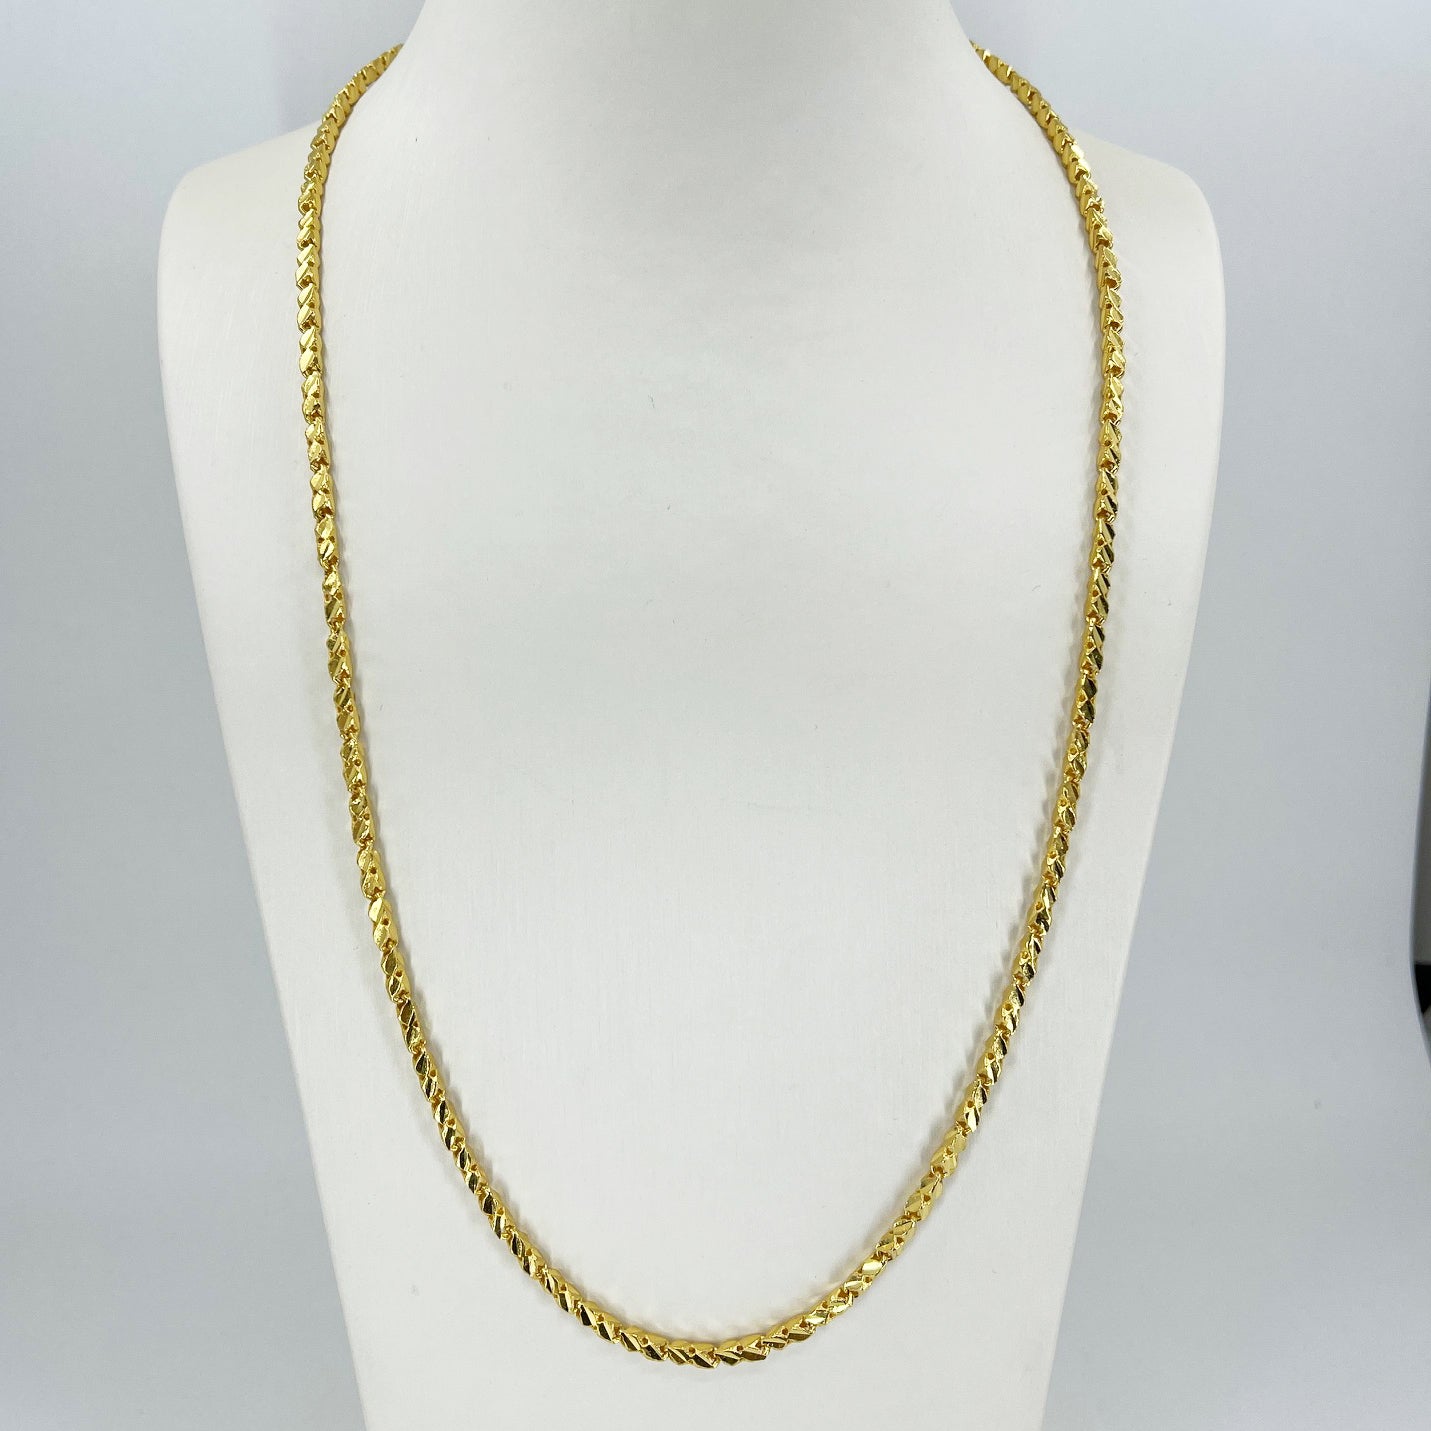 24K Solid Yellow Gold Square Link Chain 35.9 Grams 24